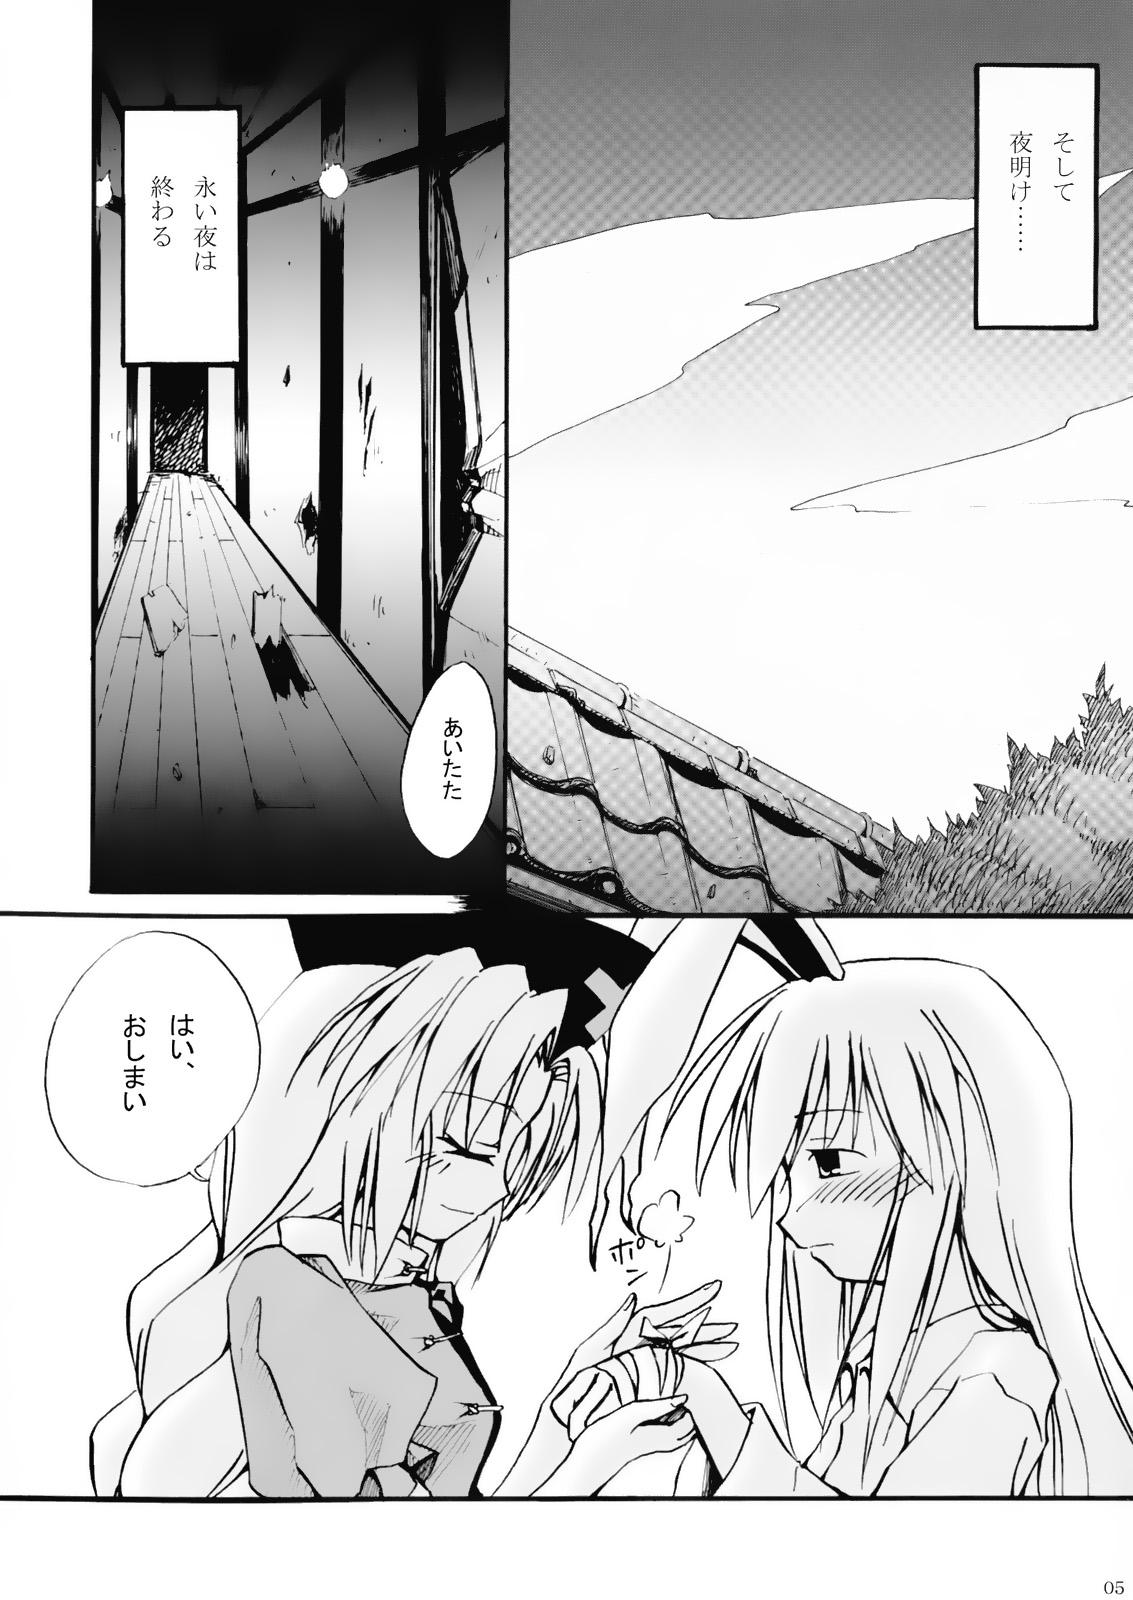 Exibicionismo 永夜 - Touhou project African - Page 4